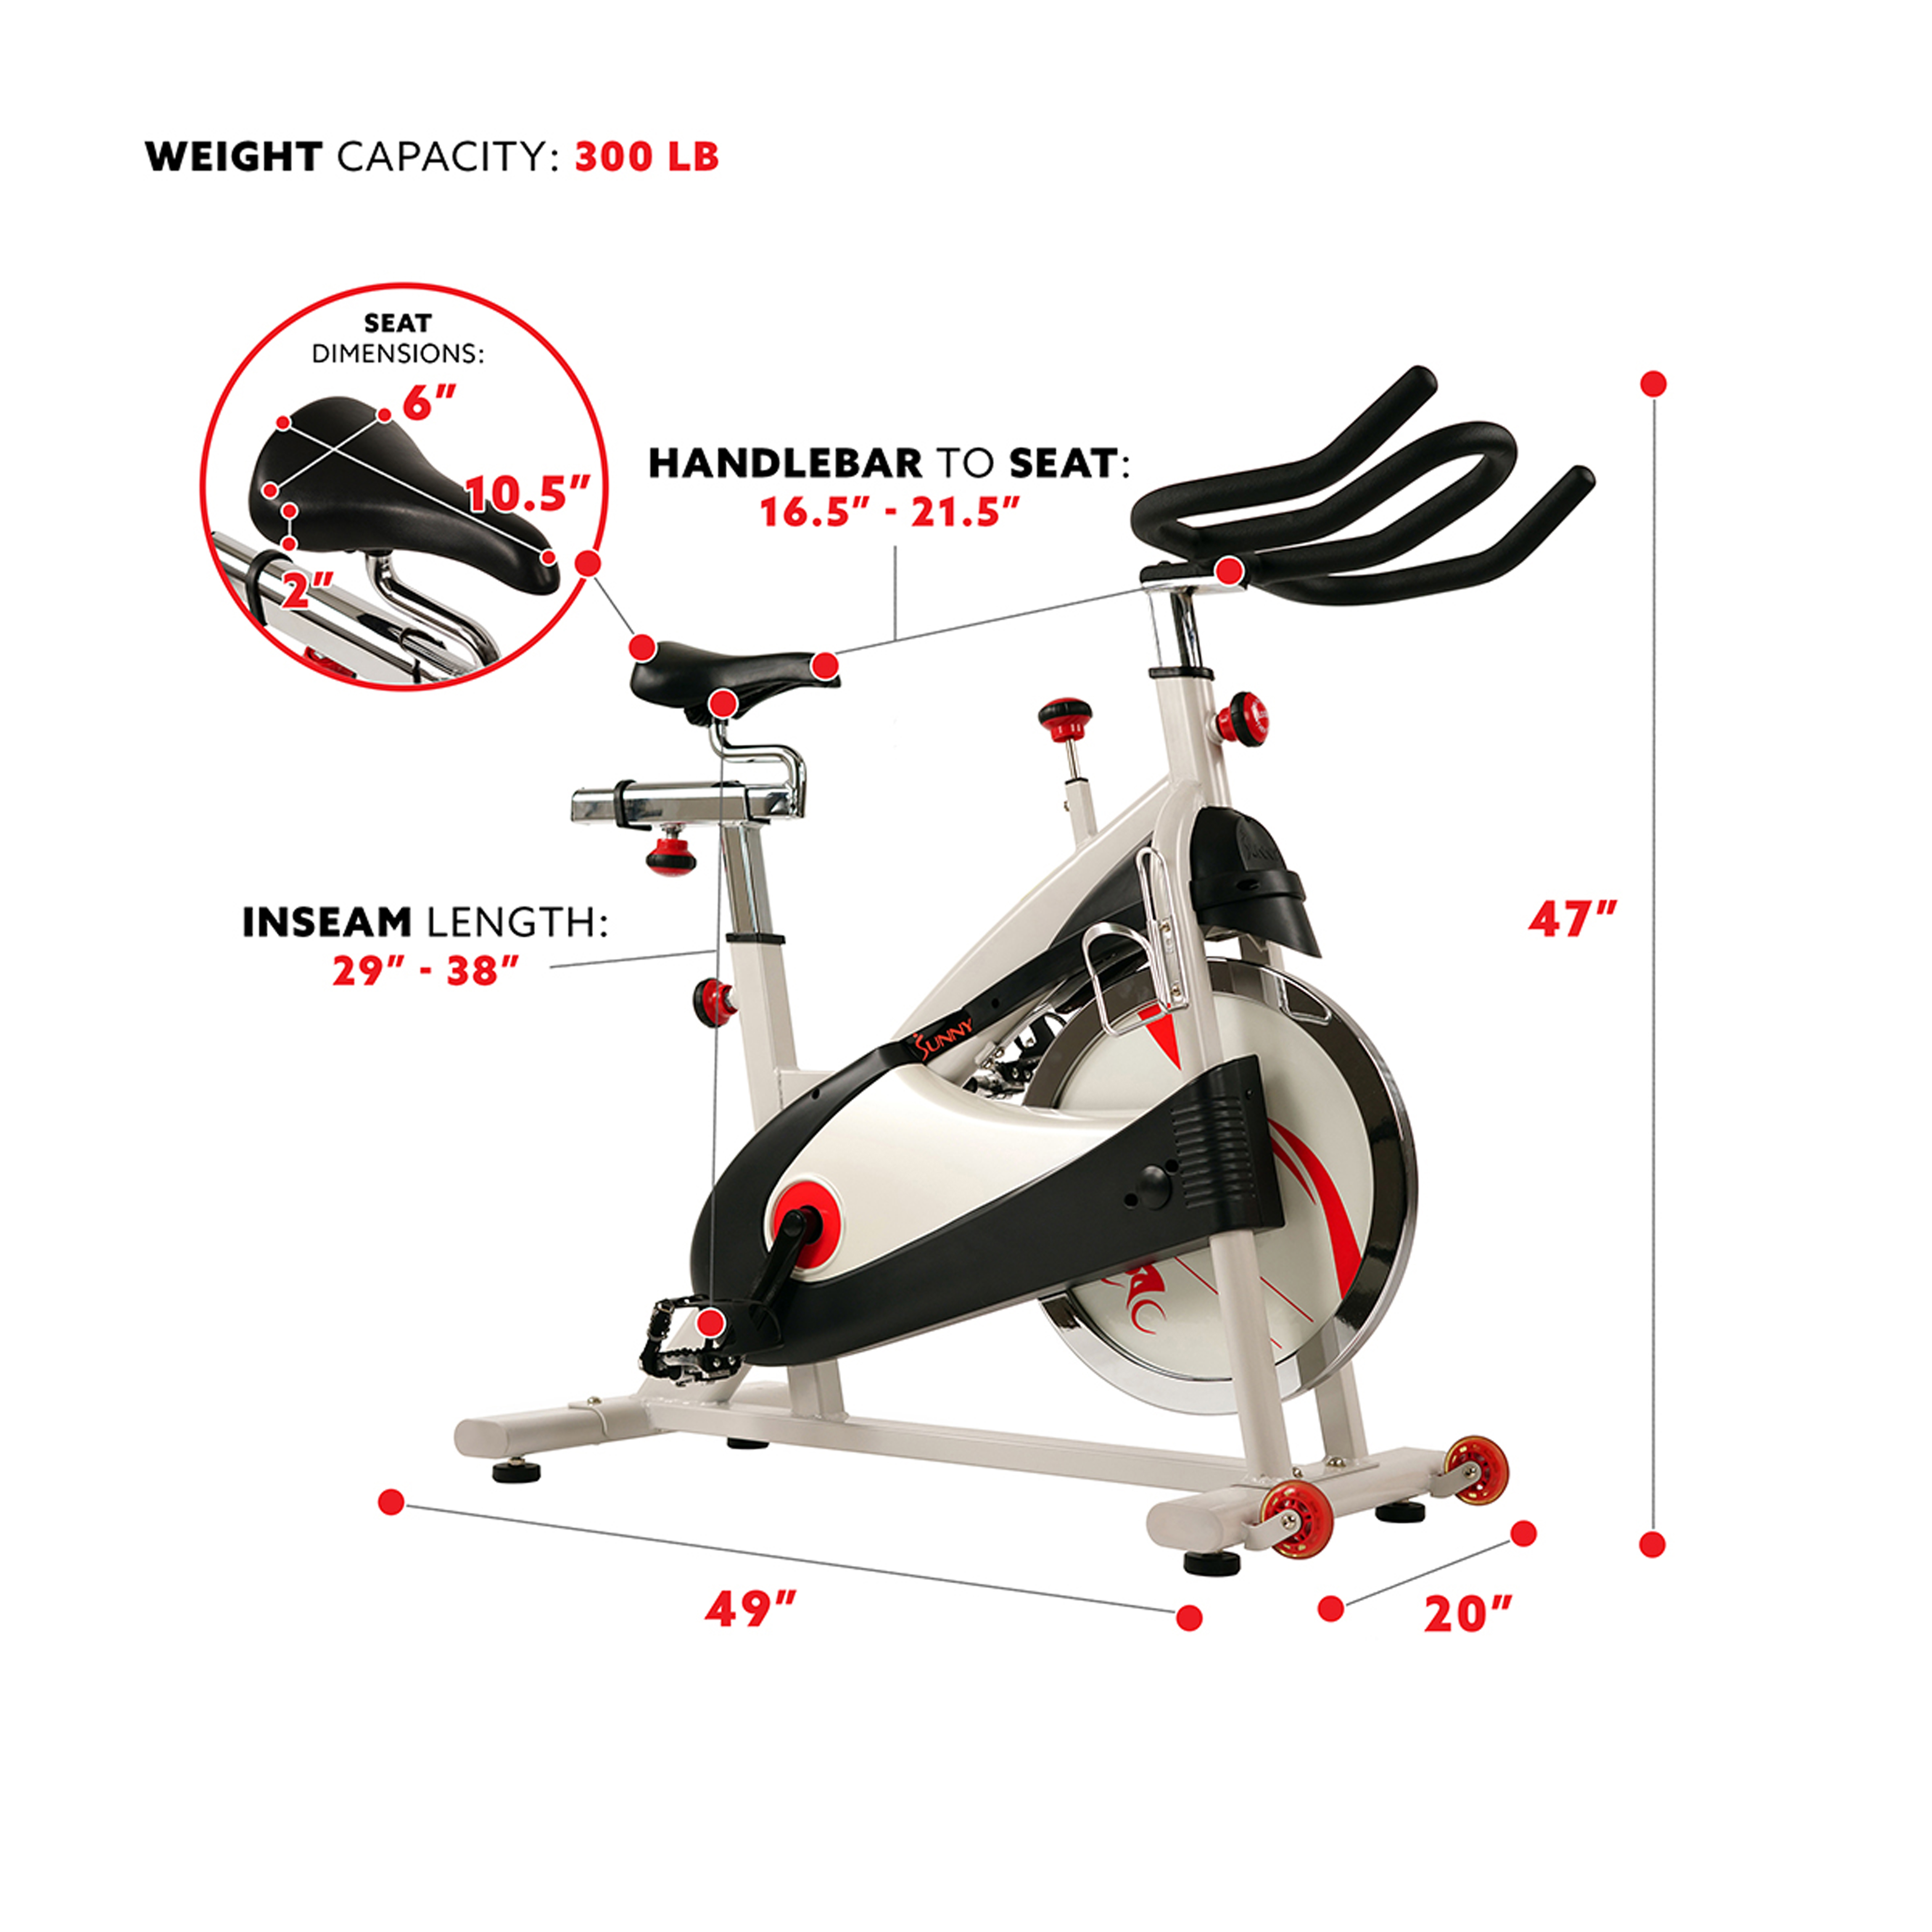 Sunny Health & Fitness Stationary Belt Drive Indoor Cycling Exercise Bike with 40 Lb, Flywheel for Home Cardio Training, SF-B1509 - image 3 of 9